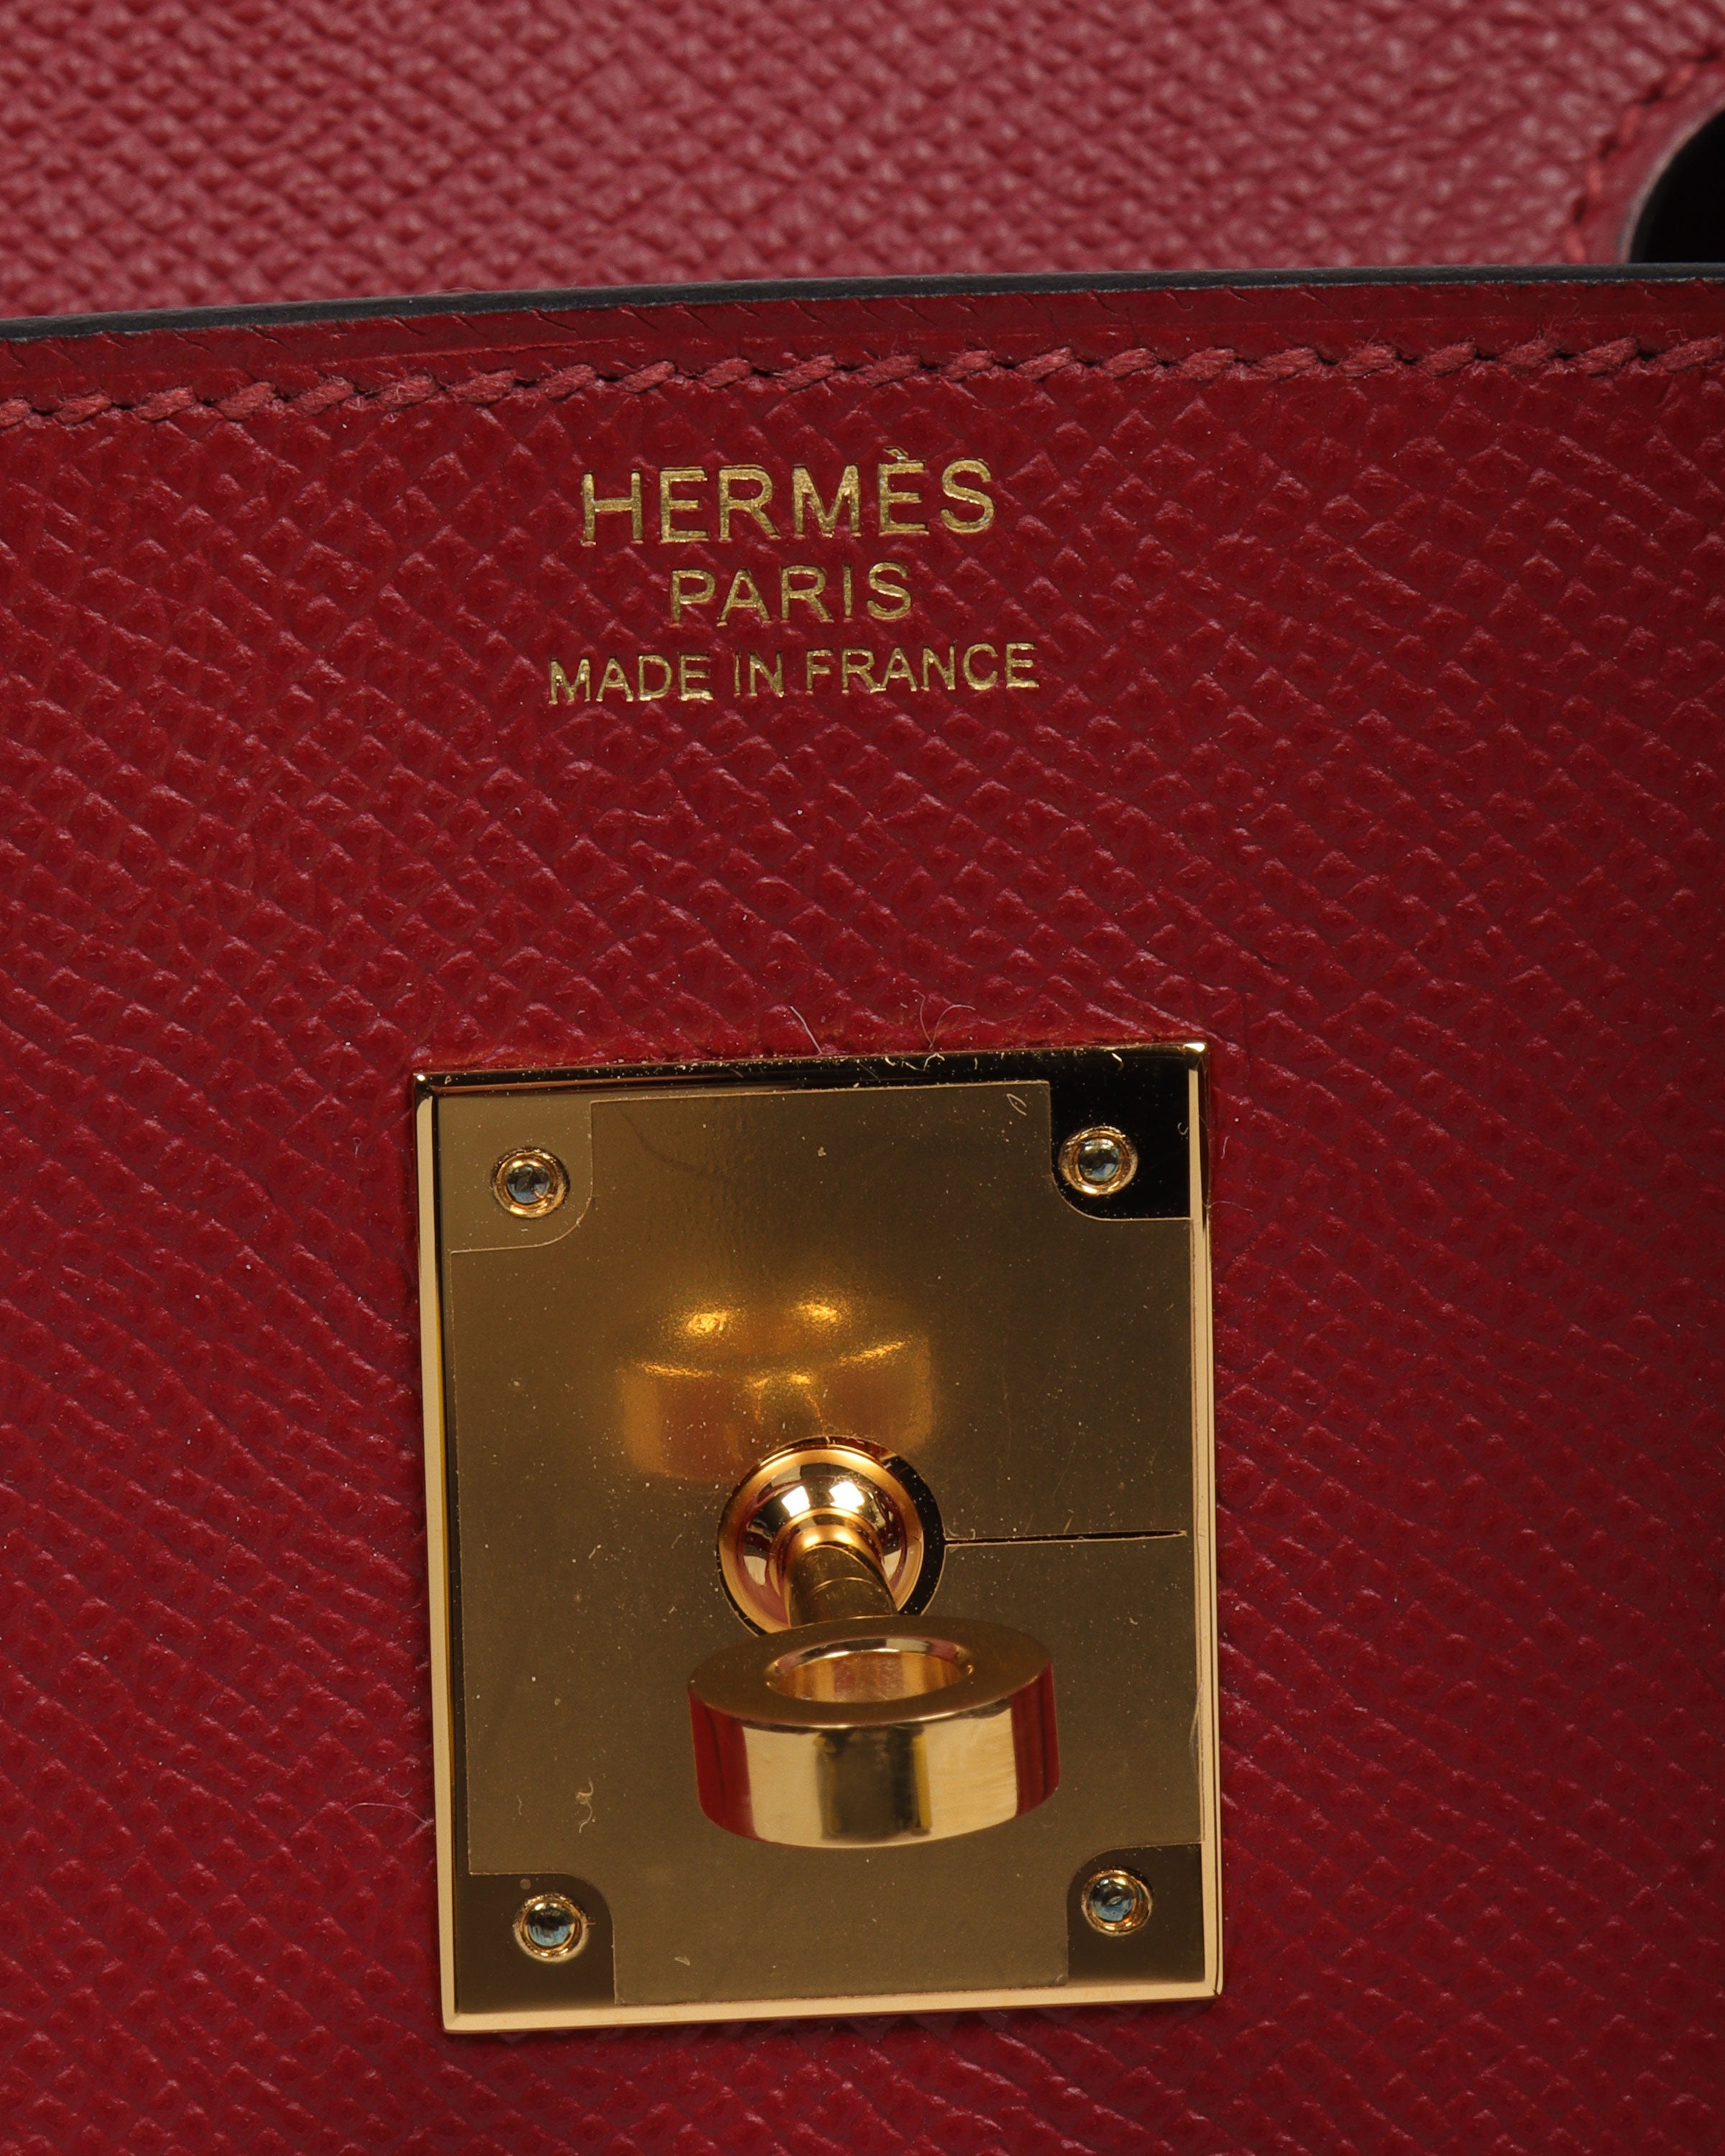 Hermes Birkin 30 in Beaton Togo Leather - New in Box - The Consignment Cafe